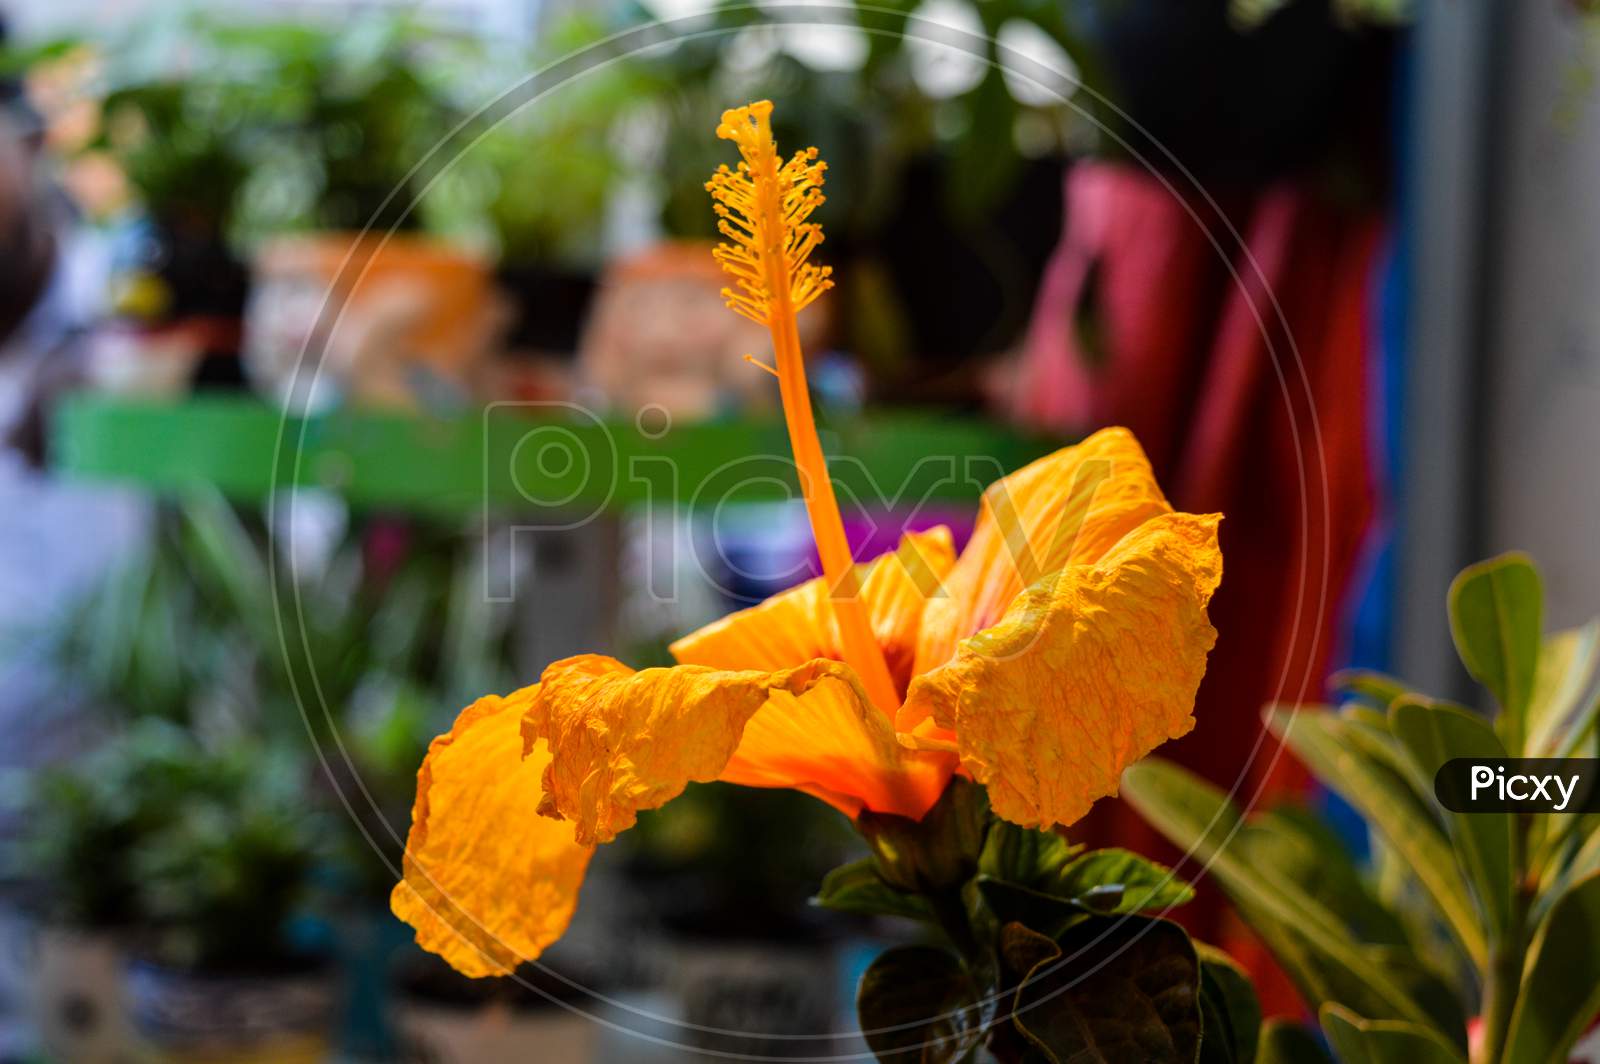 A Yellow Flower At Stall At Evening.